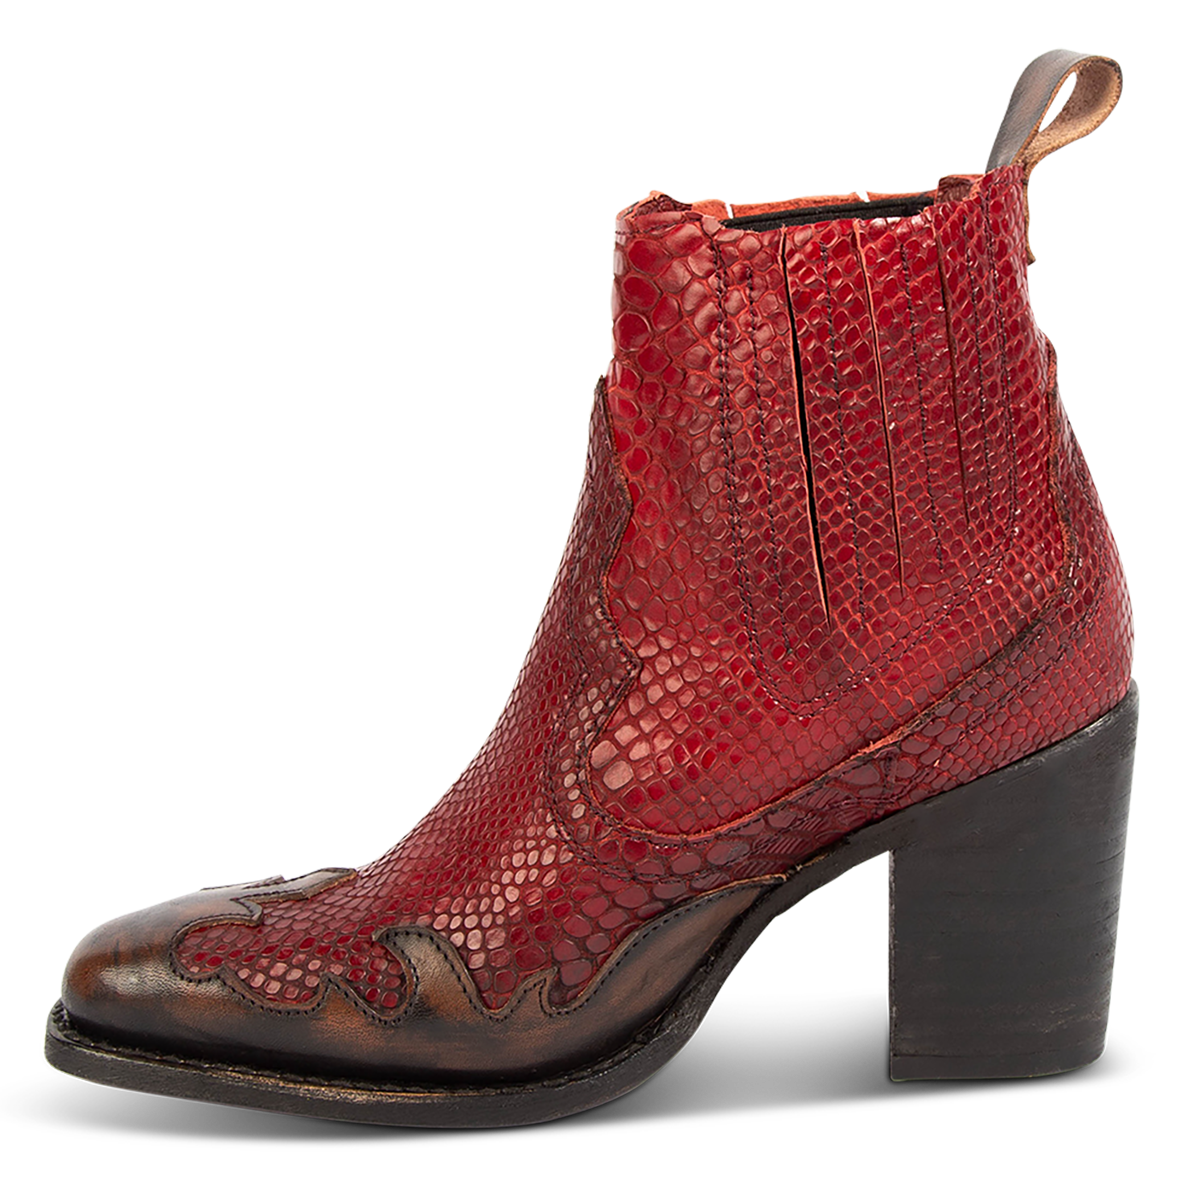 Inside view showing FREEBIRD women's Paula red multi contrast leather overlay bootie with gore detailing, stacked heel and heel leather pull tab